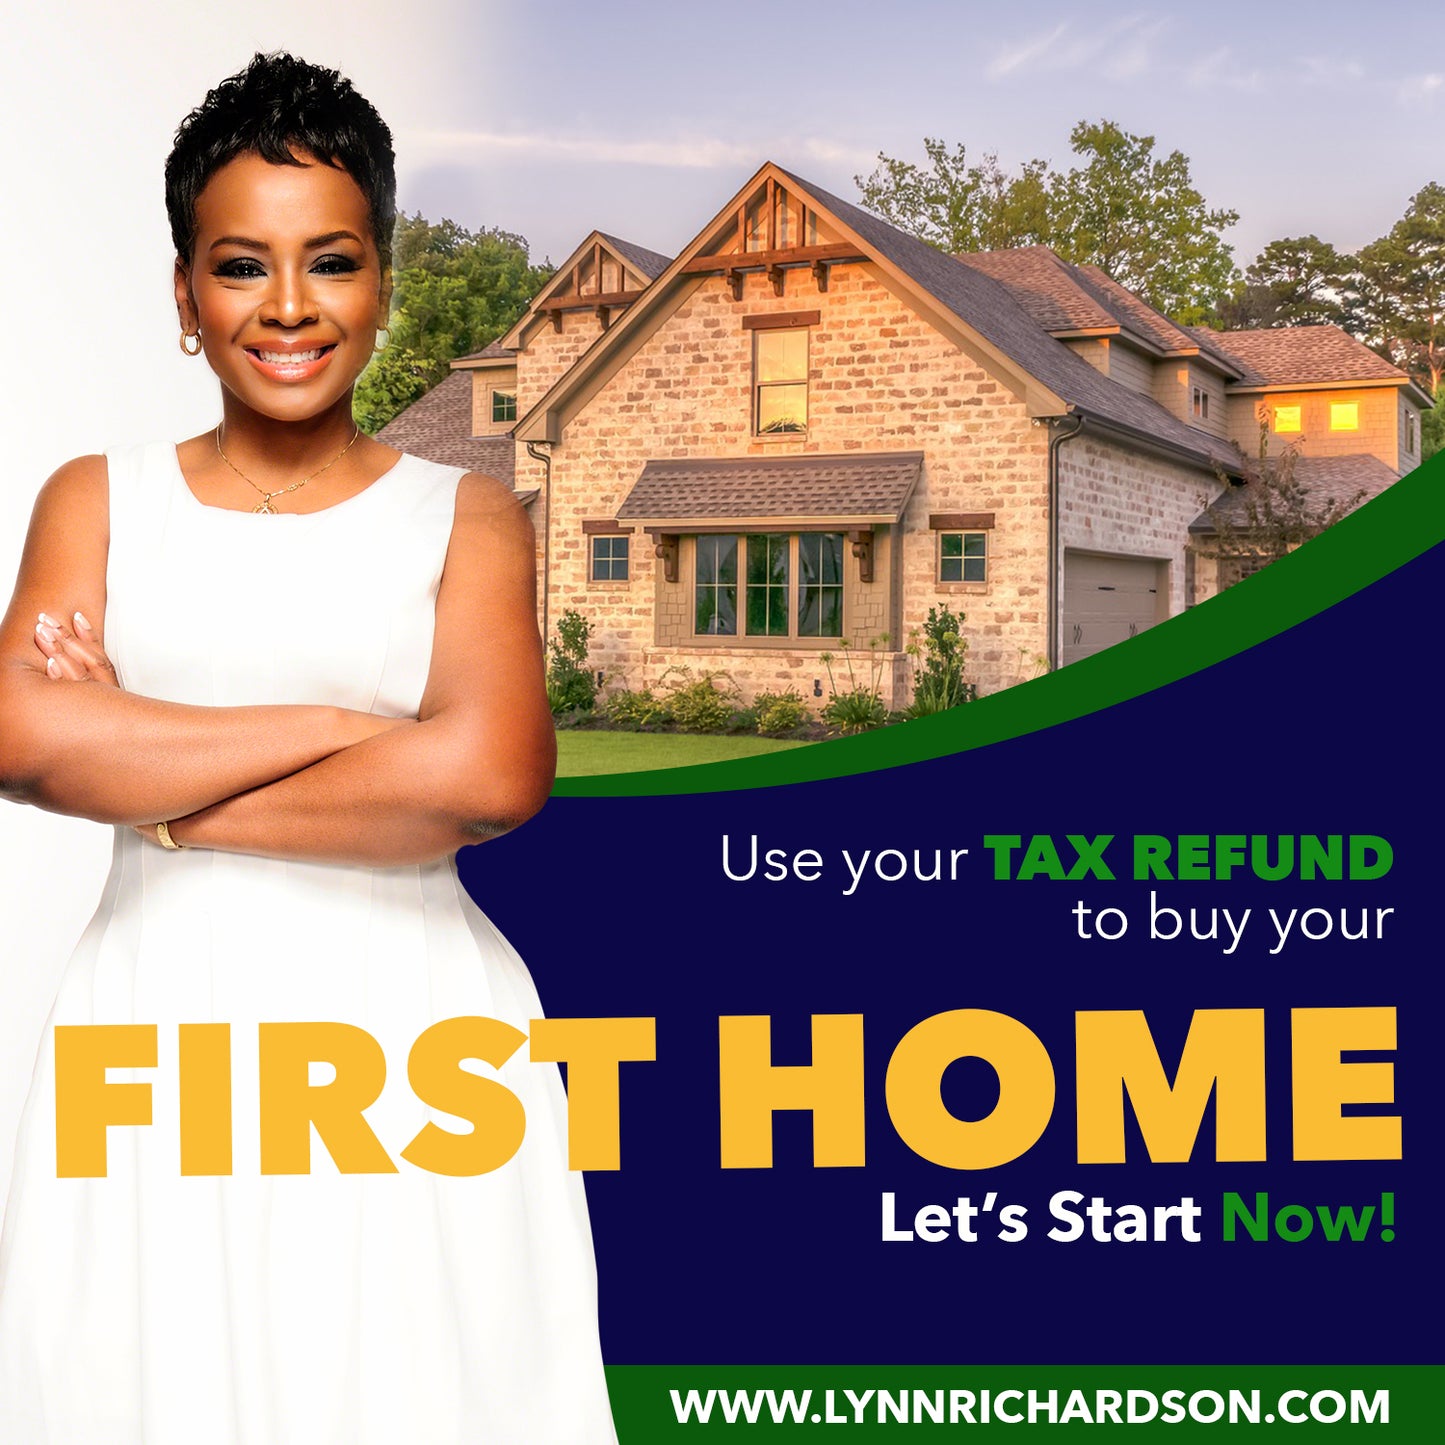 The Road to Homeownership “How to Buy Your First or Next Home” Webinar